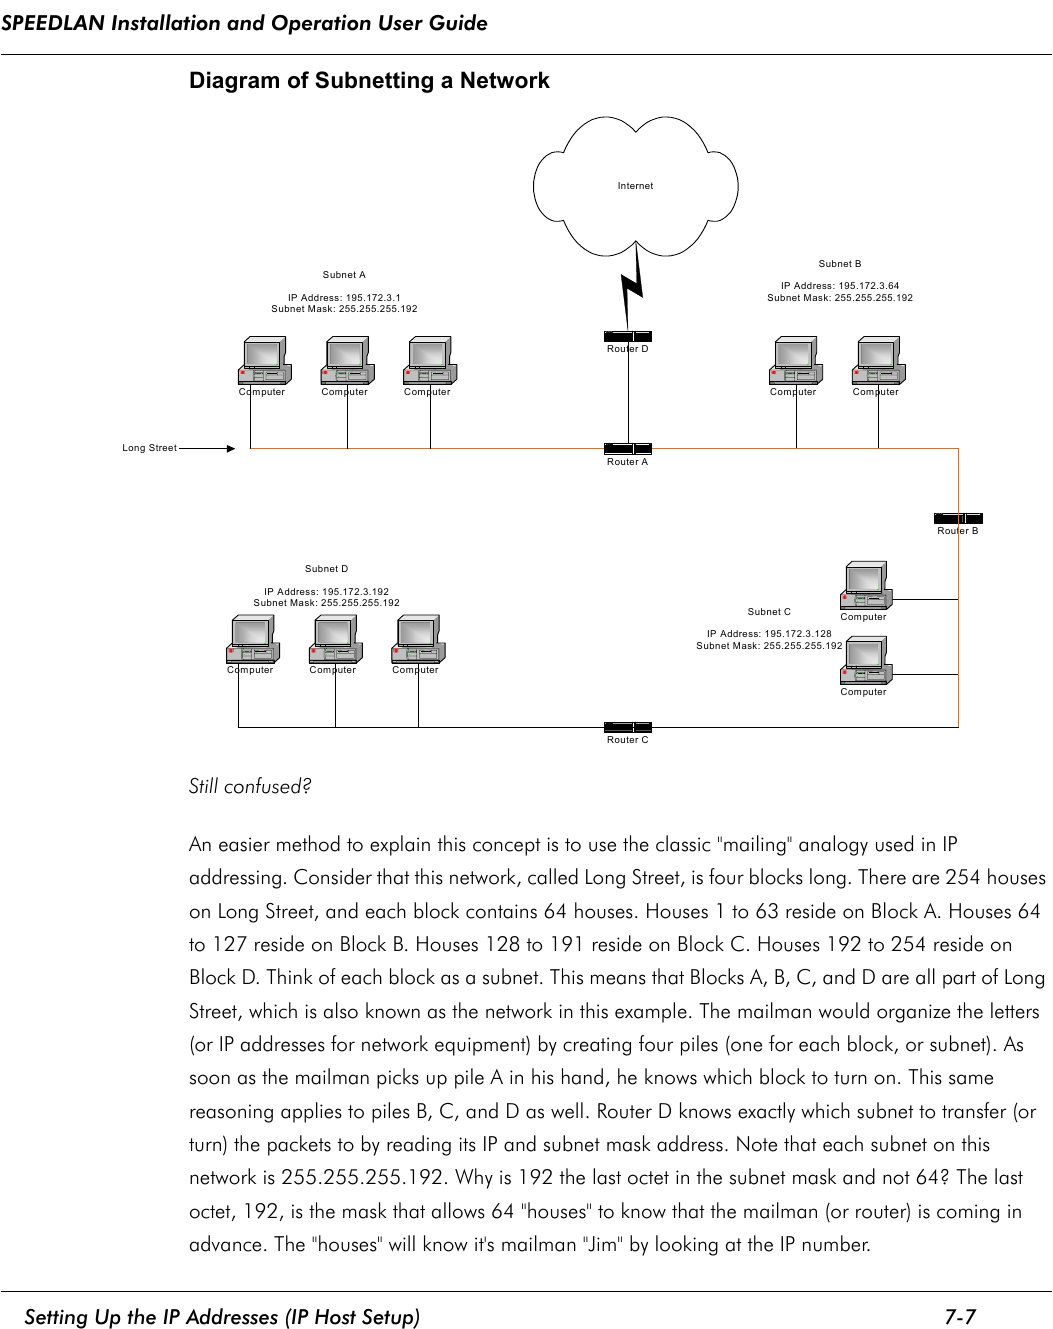 SPEEDLAN Installation and Operation User Guide     Setting Up the IP Addresses (IP Host Setup) 7-7                                                                                                                                                              Diagram of Subnetting a NetworkStill confused? An easier method to explain this concept is to use the classic &quot;mailing&quot; analogy used in IP addressing. Consider that this network, called Long Street, is four blocks long. There are 254 houses on Long Street, and each block contains 64 houses. Houses 1 to 63 reside on Block A. Houses 64 to 127 reside on Block B. Houses 128 to 191 reside on Block C. Houses 192 to 254 reside on Block D. Think of each block as a subnet. This means that Blocks A, B, C, and D are all part of Long Street, which is also known as the network in this example. The mailman would organize the letters (or IP addresses for network equipment) by creating four piles (one for each block, or subnet). As soon as the mailman picks up pile A in his hand, he knows which block to turn on. This same reasoning applies to piles B, C, and D as well. Router D knows exactly which subnet to transfer (or turn) the packets to by reading its IP and subnet mask address. Note that each subnet on this network is 255.255.255.192. Why is 192 the last octet in the subnet mask and not 64? The last octet, 192, is the mask that allows 64 &quot;houses&quot; to know that the mailman (or router) is coming in advance. The &quot;houses&quot; will know it&apos;s mailman &quot;Jim&quot; by looking at the IP number. InternetRouter DRouter BRouter CComputer ComputerComputerComputerComputer Computer ComputerComputer Computer ComputerLong StreetSubnet AIP Address: 195.172.3.1Subnet Mask: 255.255.255.192Subnet BIP Address: 195.172.3.64Subnet Mask: 255.255.255.192Subnet CIP Address: 195.172.3.128Subnet Mask: 255.255.255.192Subnet DIP Address: 195.172.3.192Subnet Mask: 255.255.255.192Router A